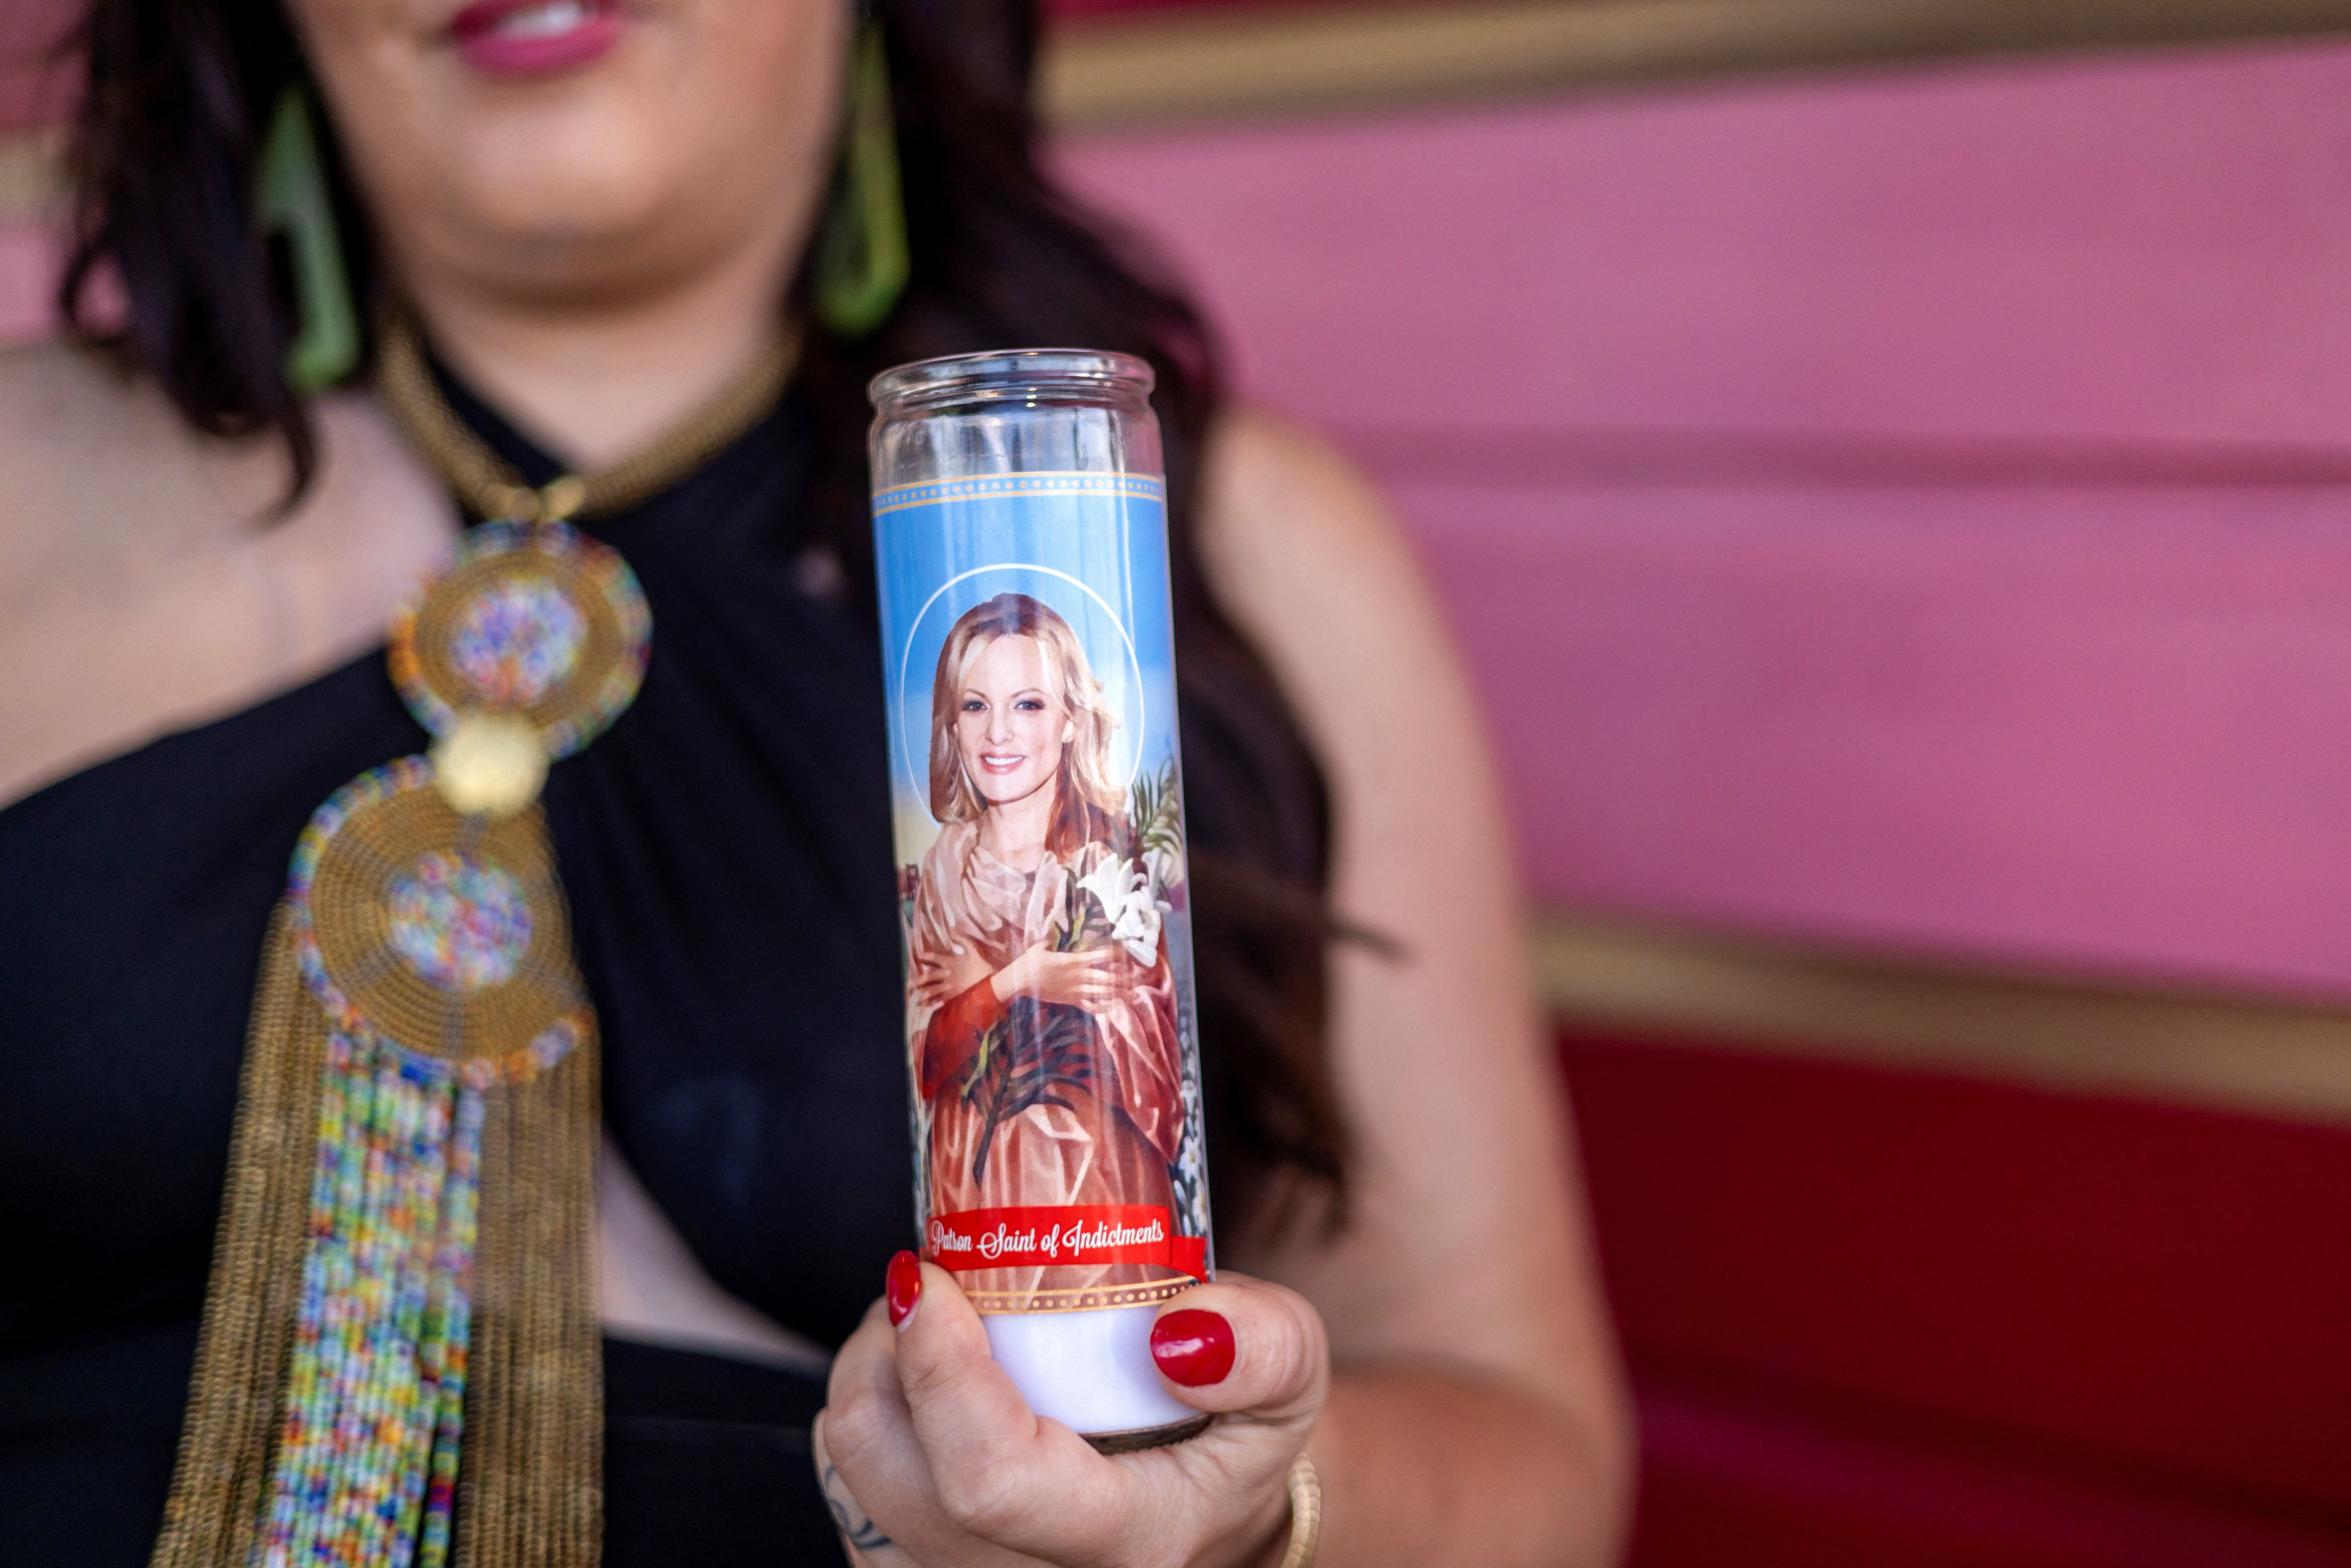 Steaphine Kauffman holds a candle depicting Stormy Daniels as the ‘Patron Saint of Indictments’ outside her comedy show in New Orleans